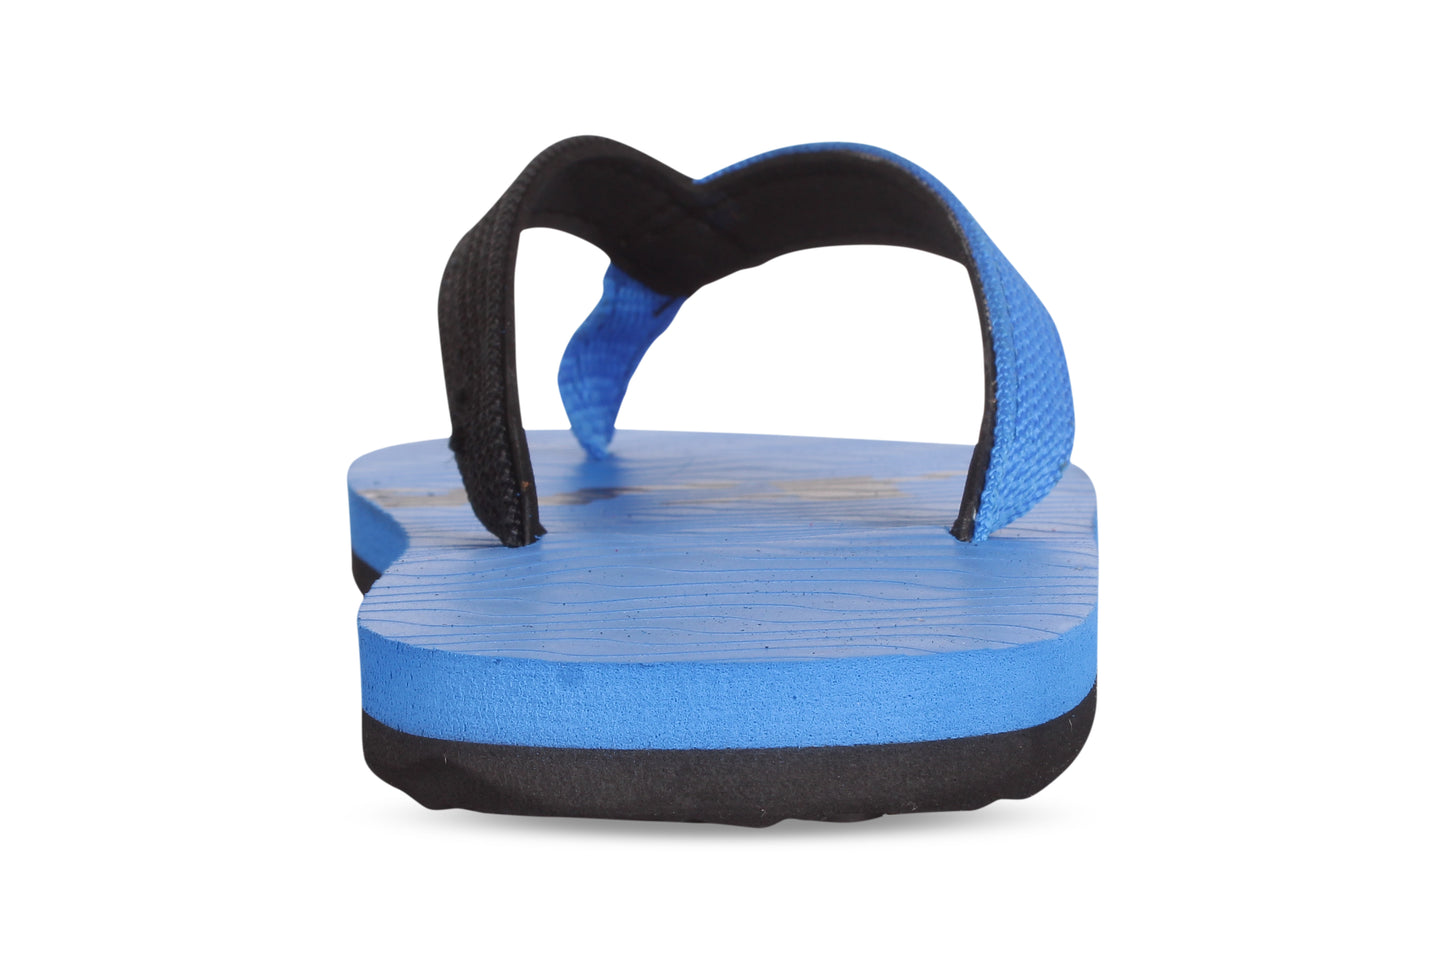 SPARX Thong-Strap Slippers for Men SFU-204 (Blue)